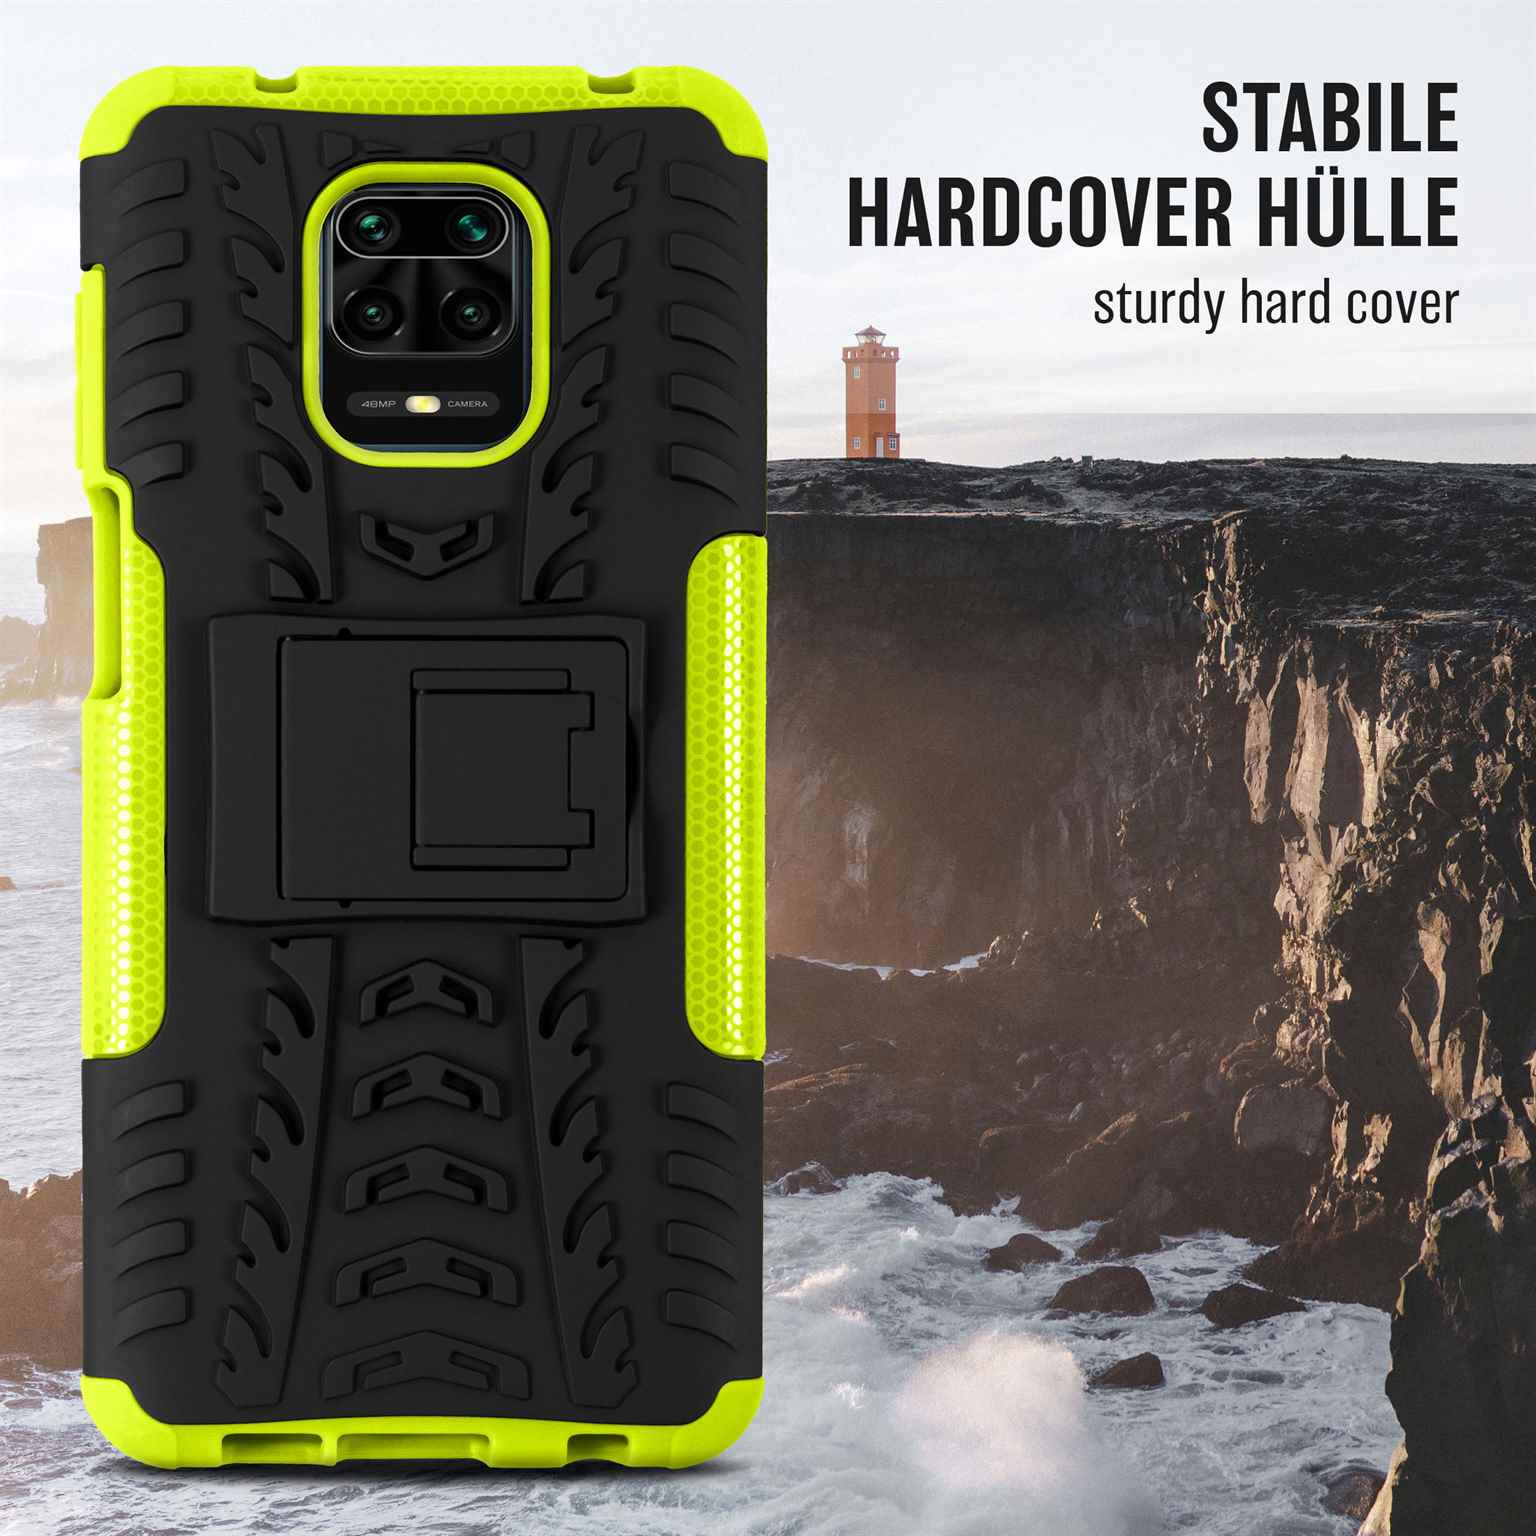 ONEFLOW Tank Redmi Backcover, Lime 9 Xiaomi, Case, Note Pro